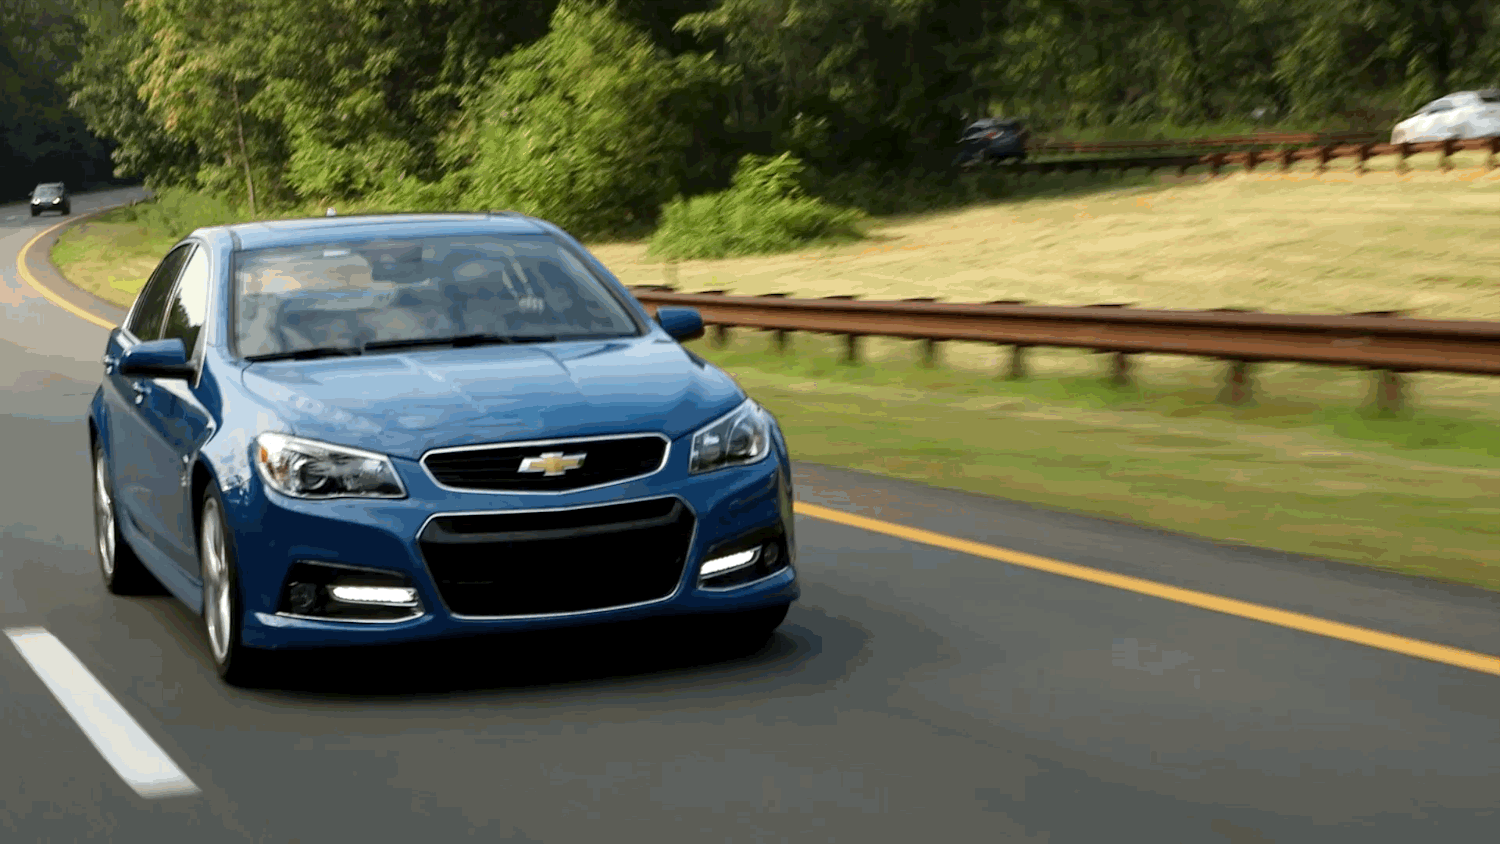 New Chevrolet SS Is a Muscle Car Disguised as a Midsized Sedan